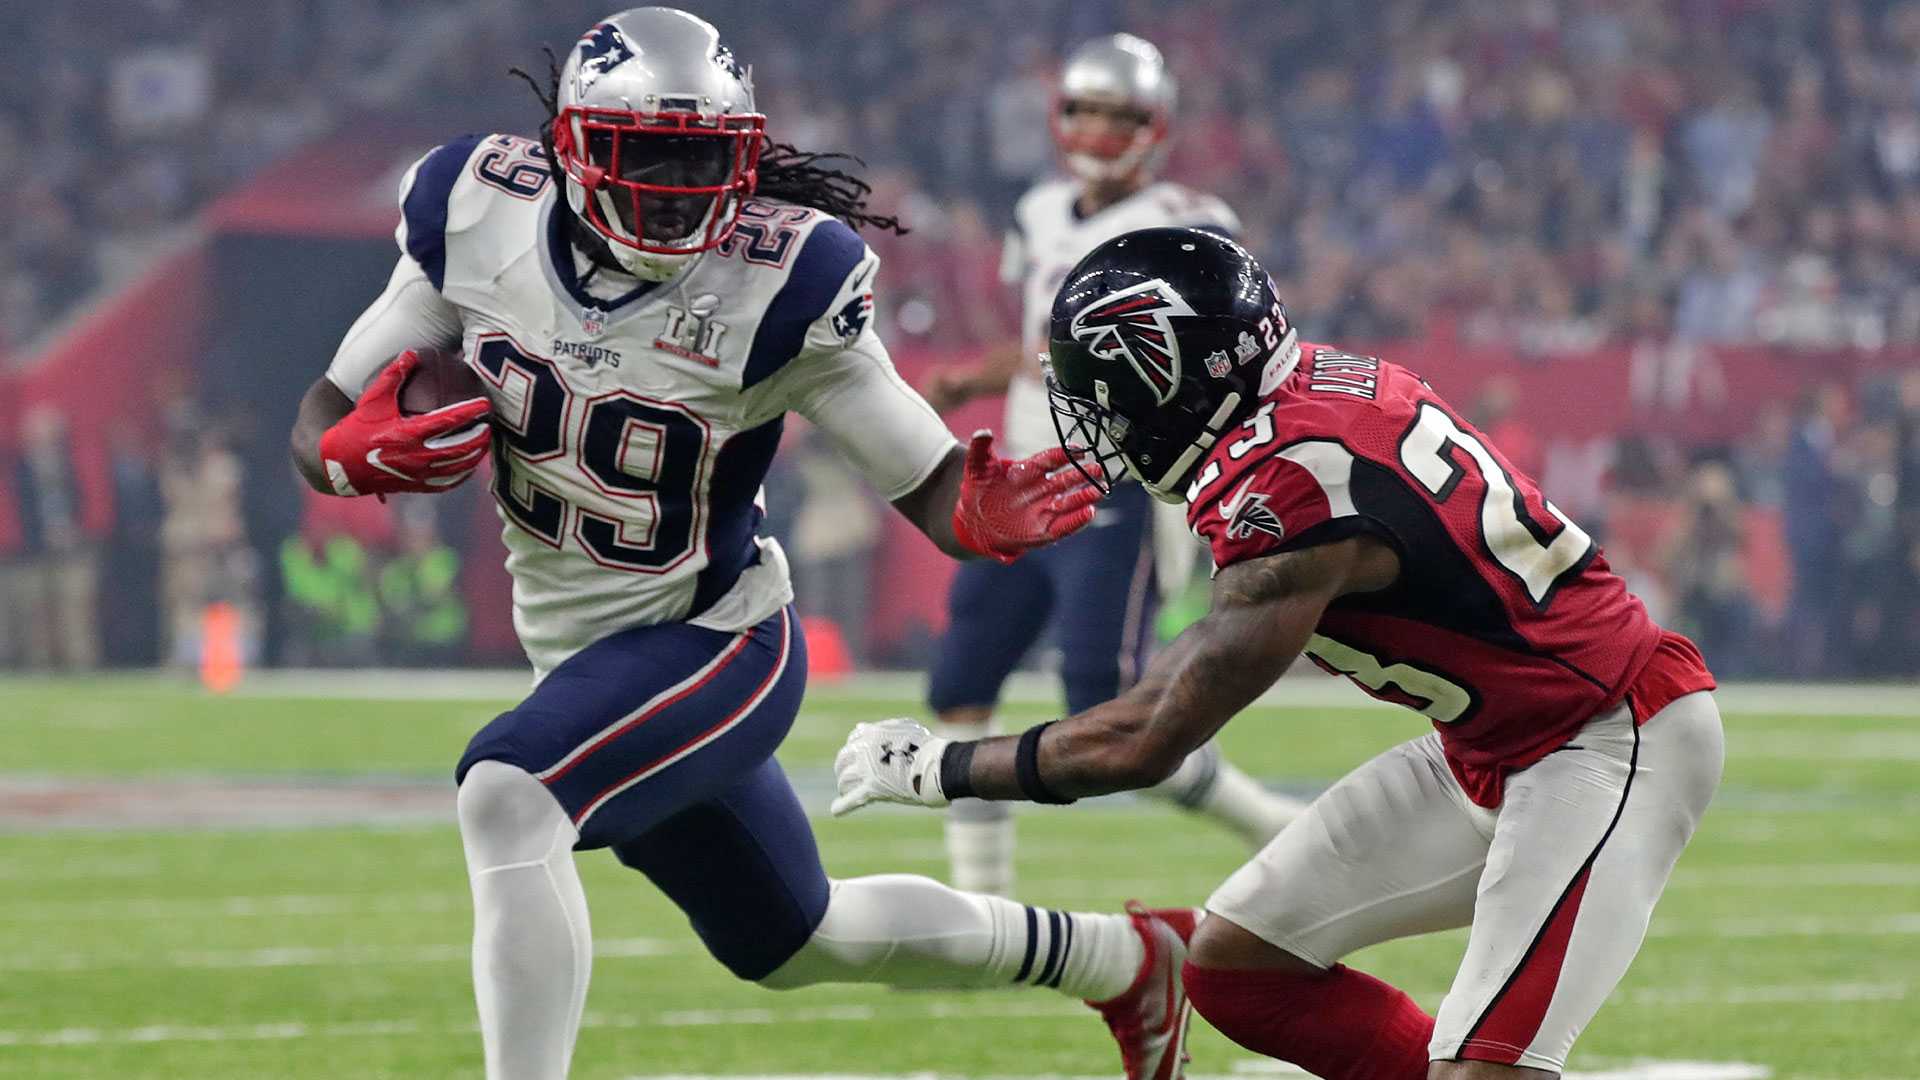 Blount, 2-time Super Bowl winner with Patriots, retires from NFL